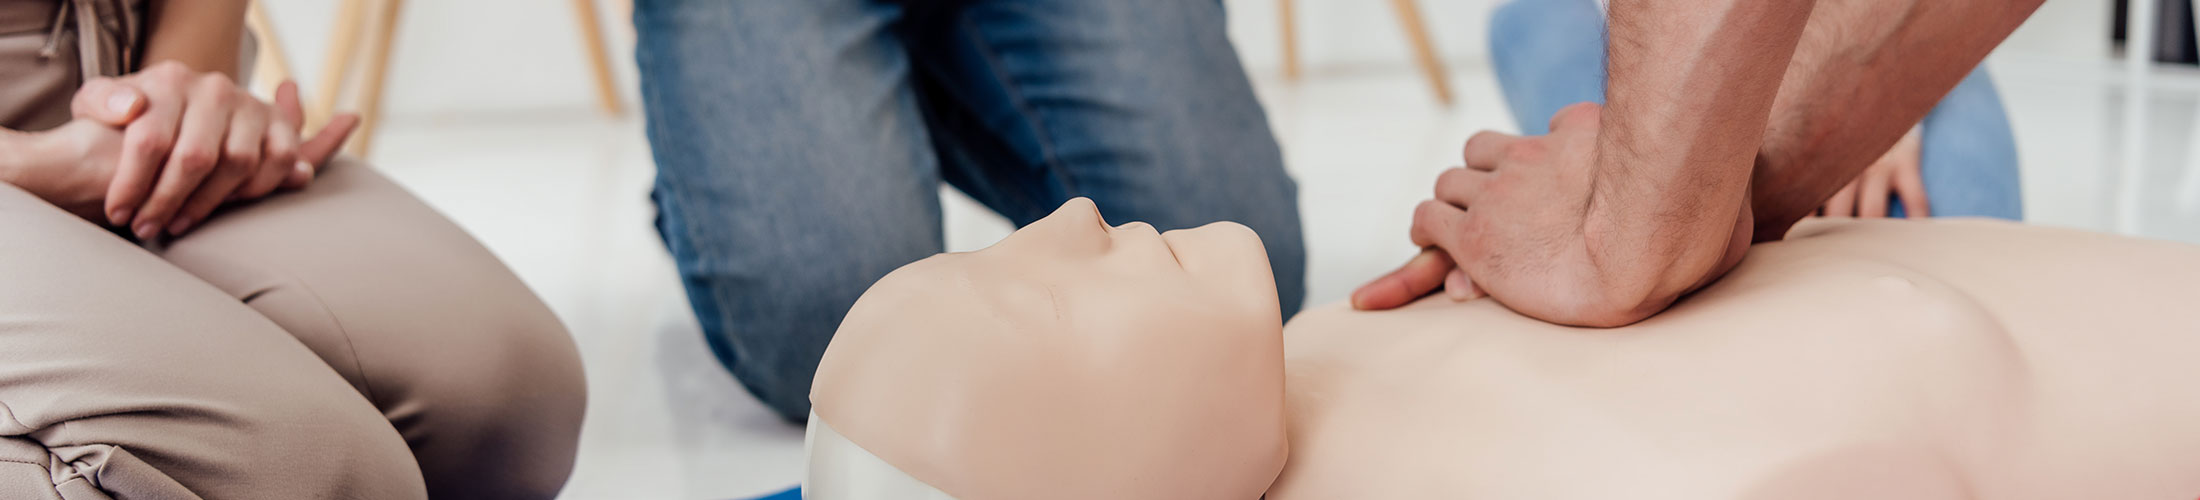 workplace first aid cpr